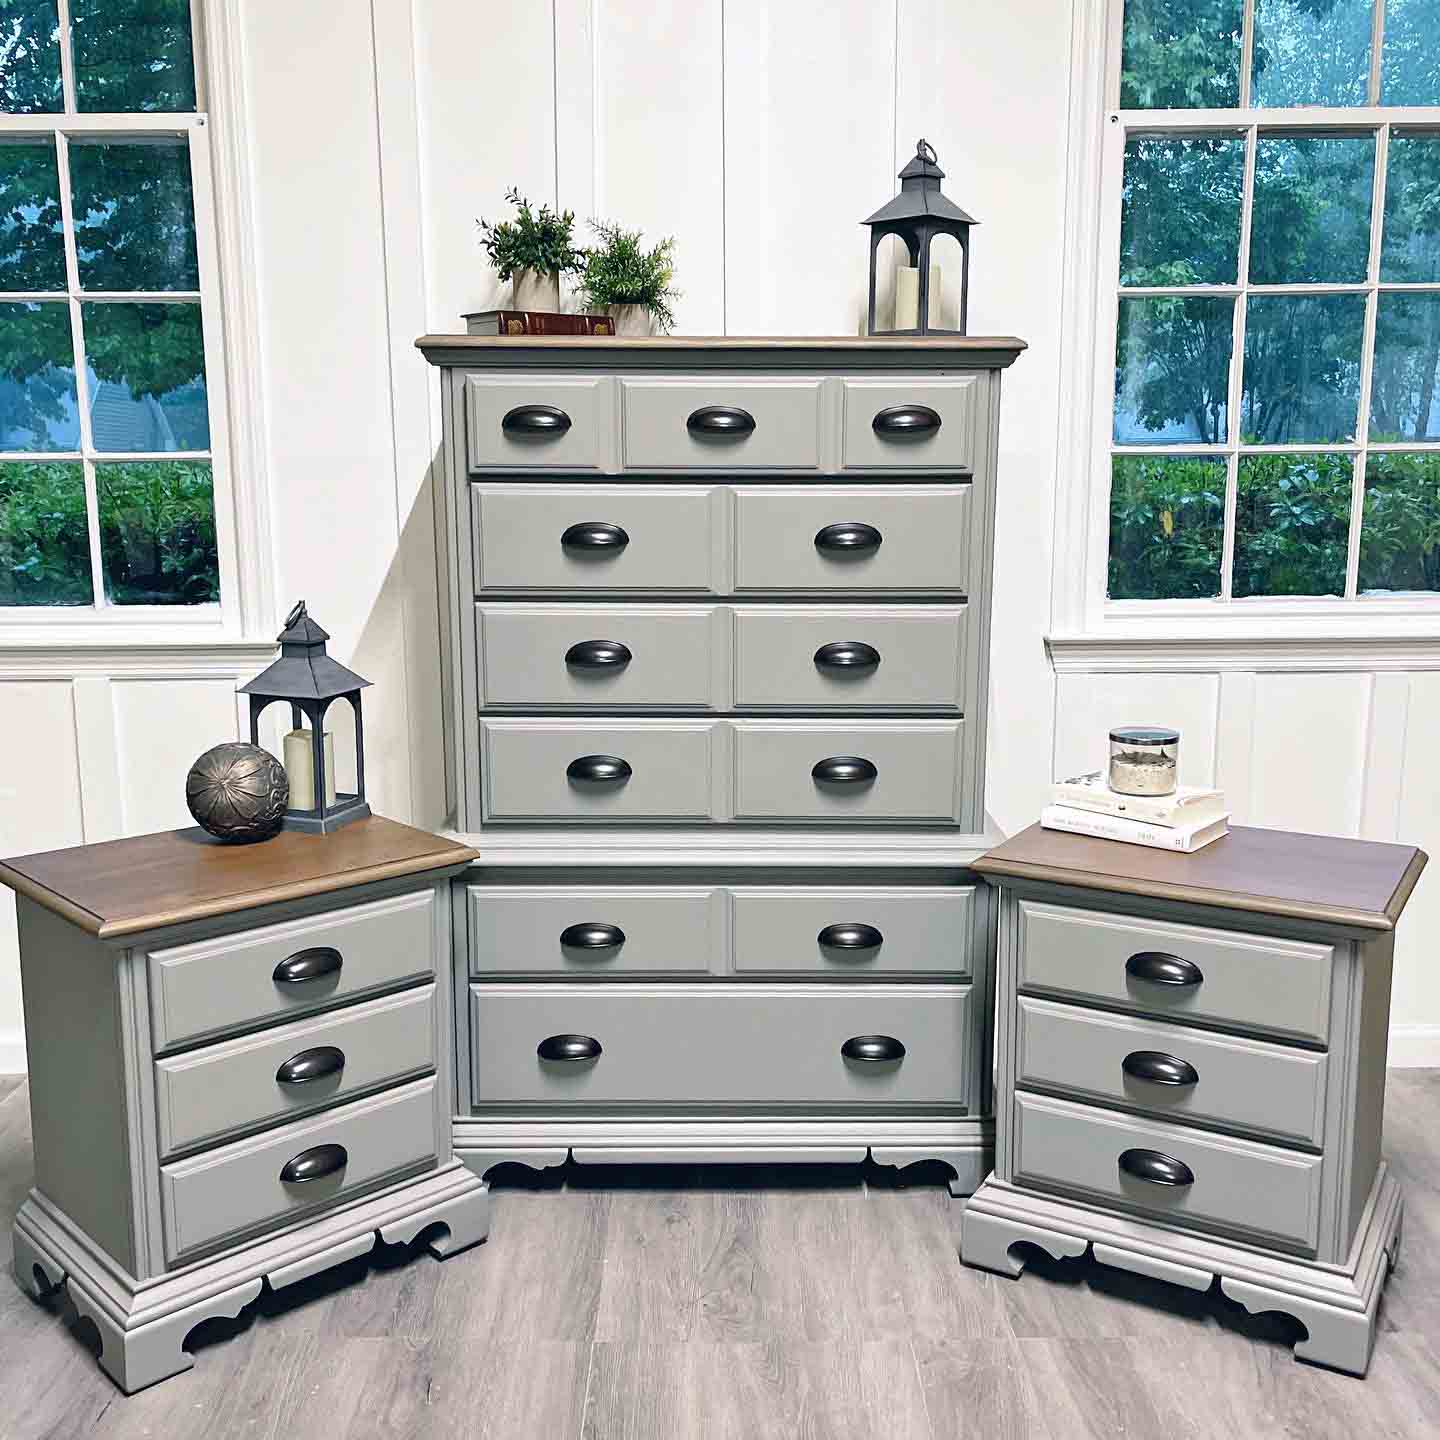 Scd Gray Erin 20210505 Moses Restorations Perfect Gray Water Based Milk Paint General Finishes 